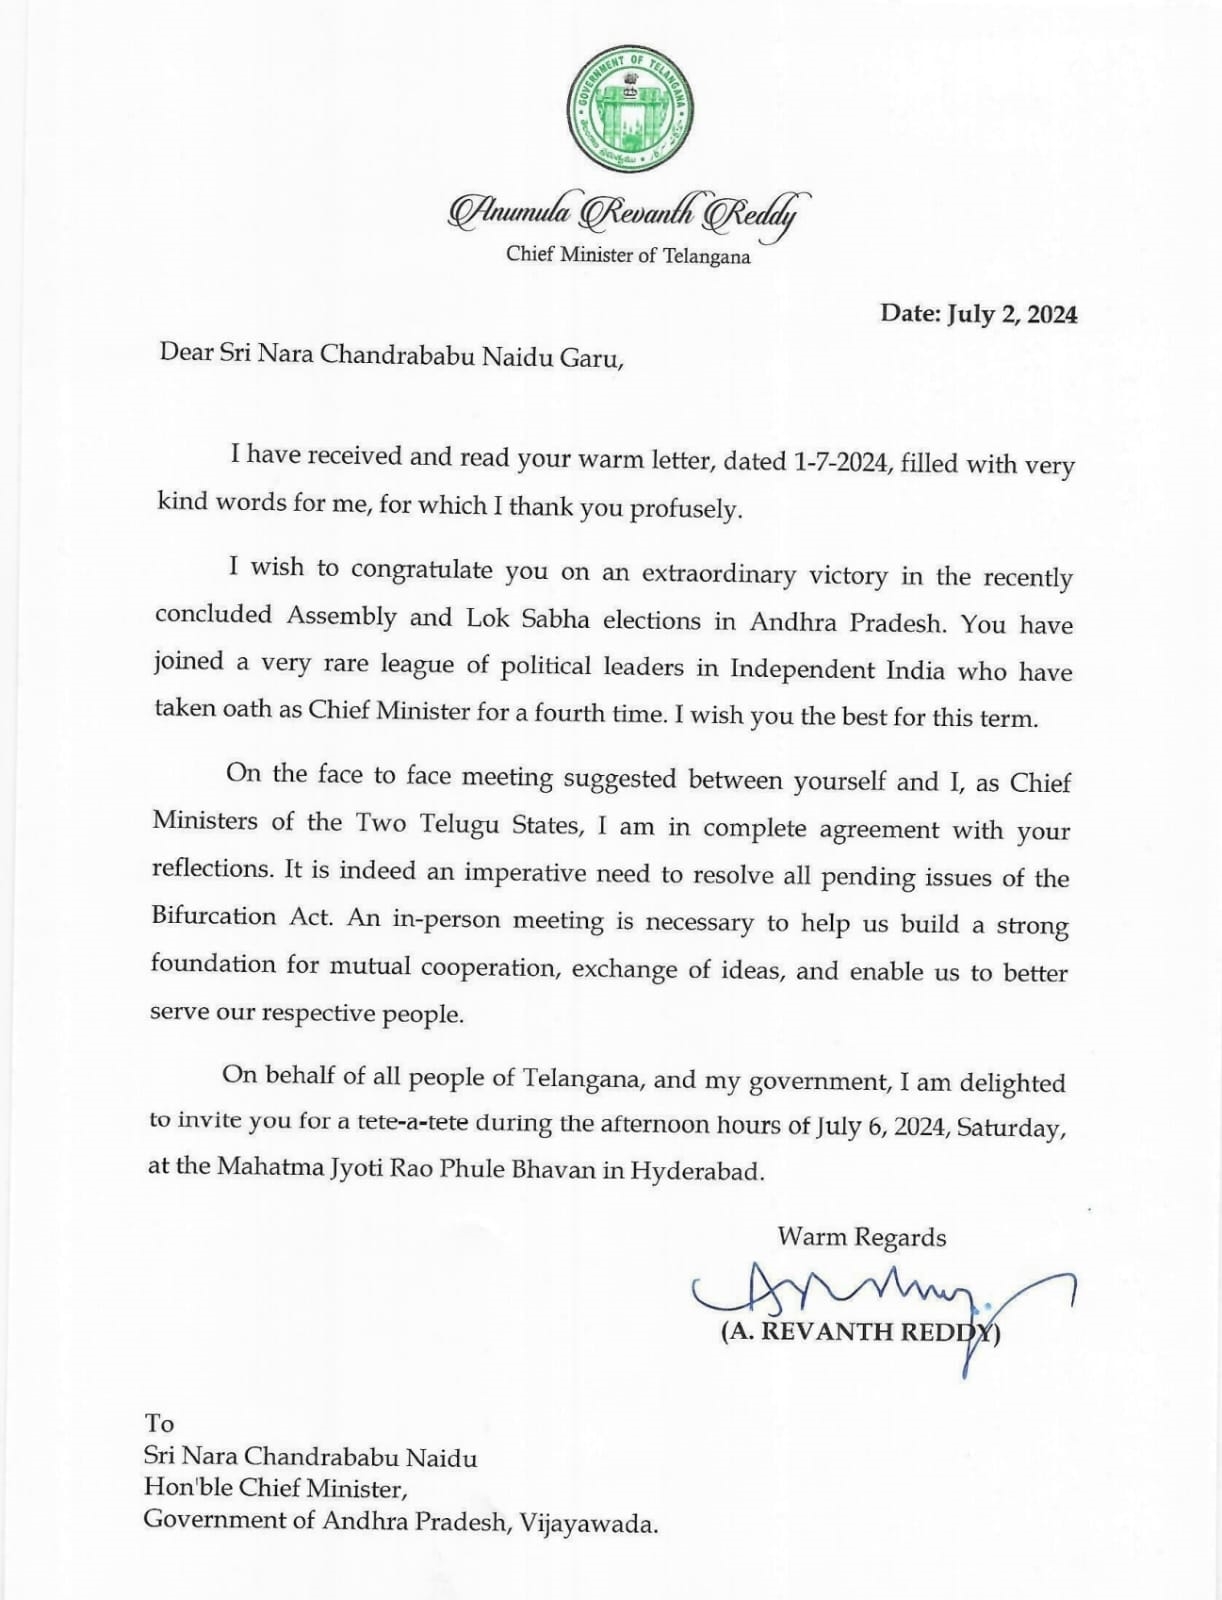 Revanth Reddy's reply to Chandrababu's letter